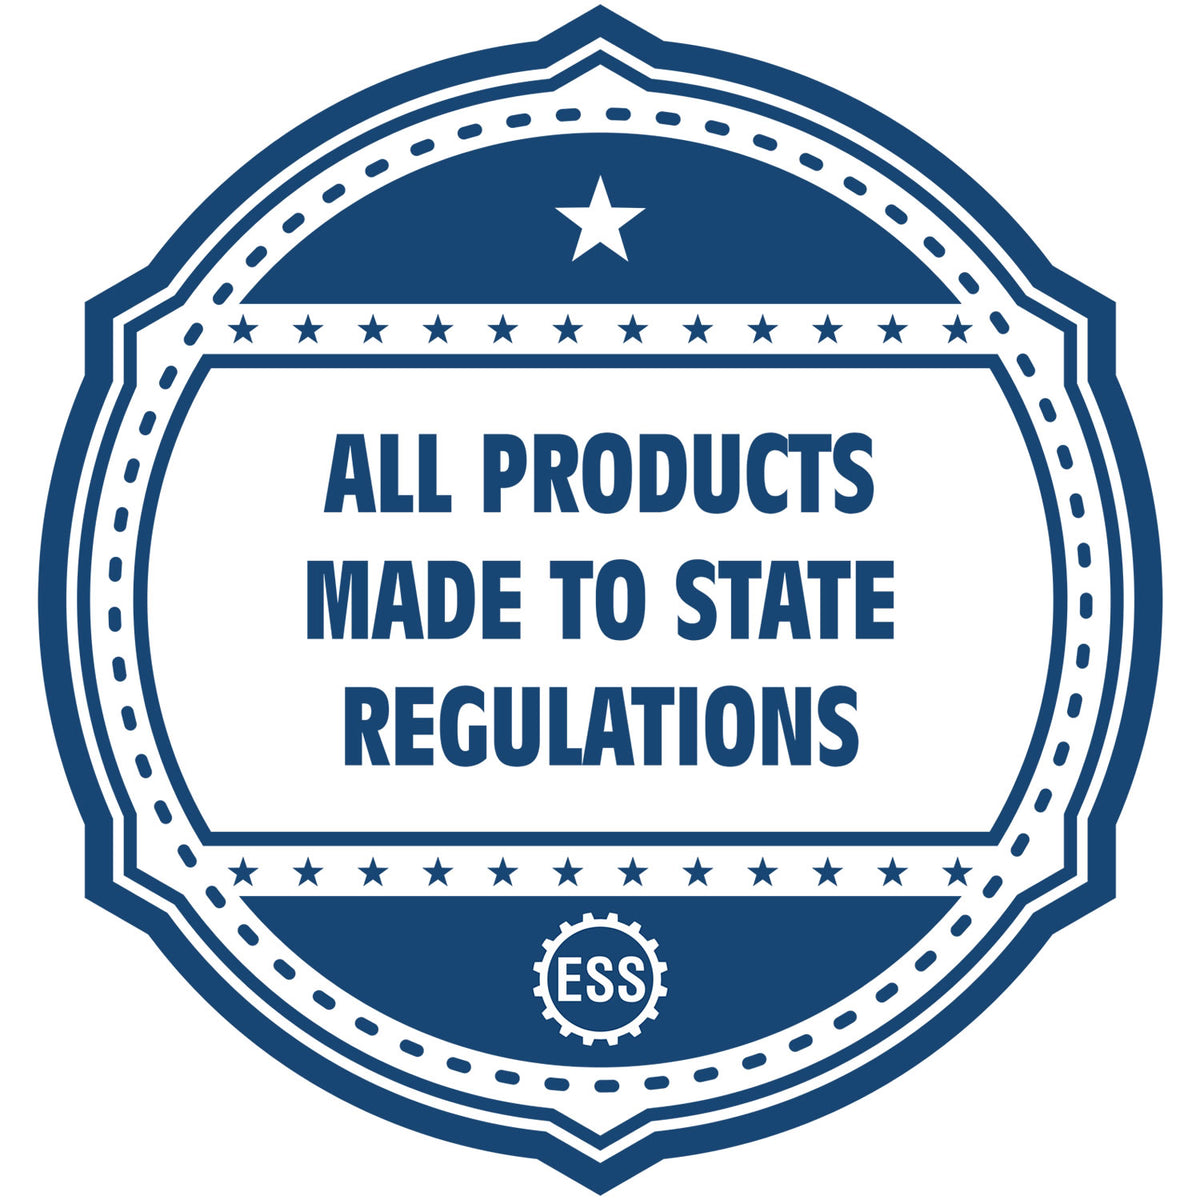 An icon or badge element for the Handheld Pennsylvania Professional Engineer Embosser showing that this product is made in compliance with state regulations.